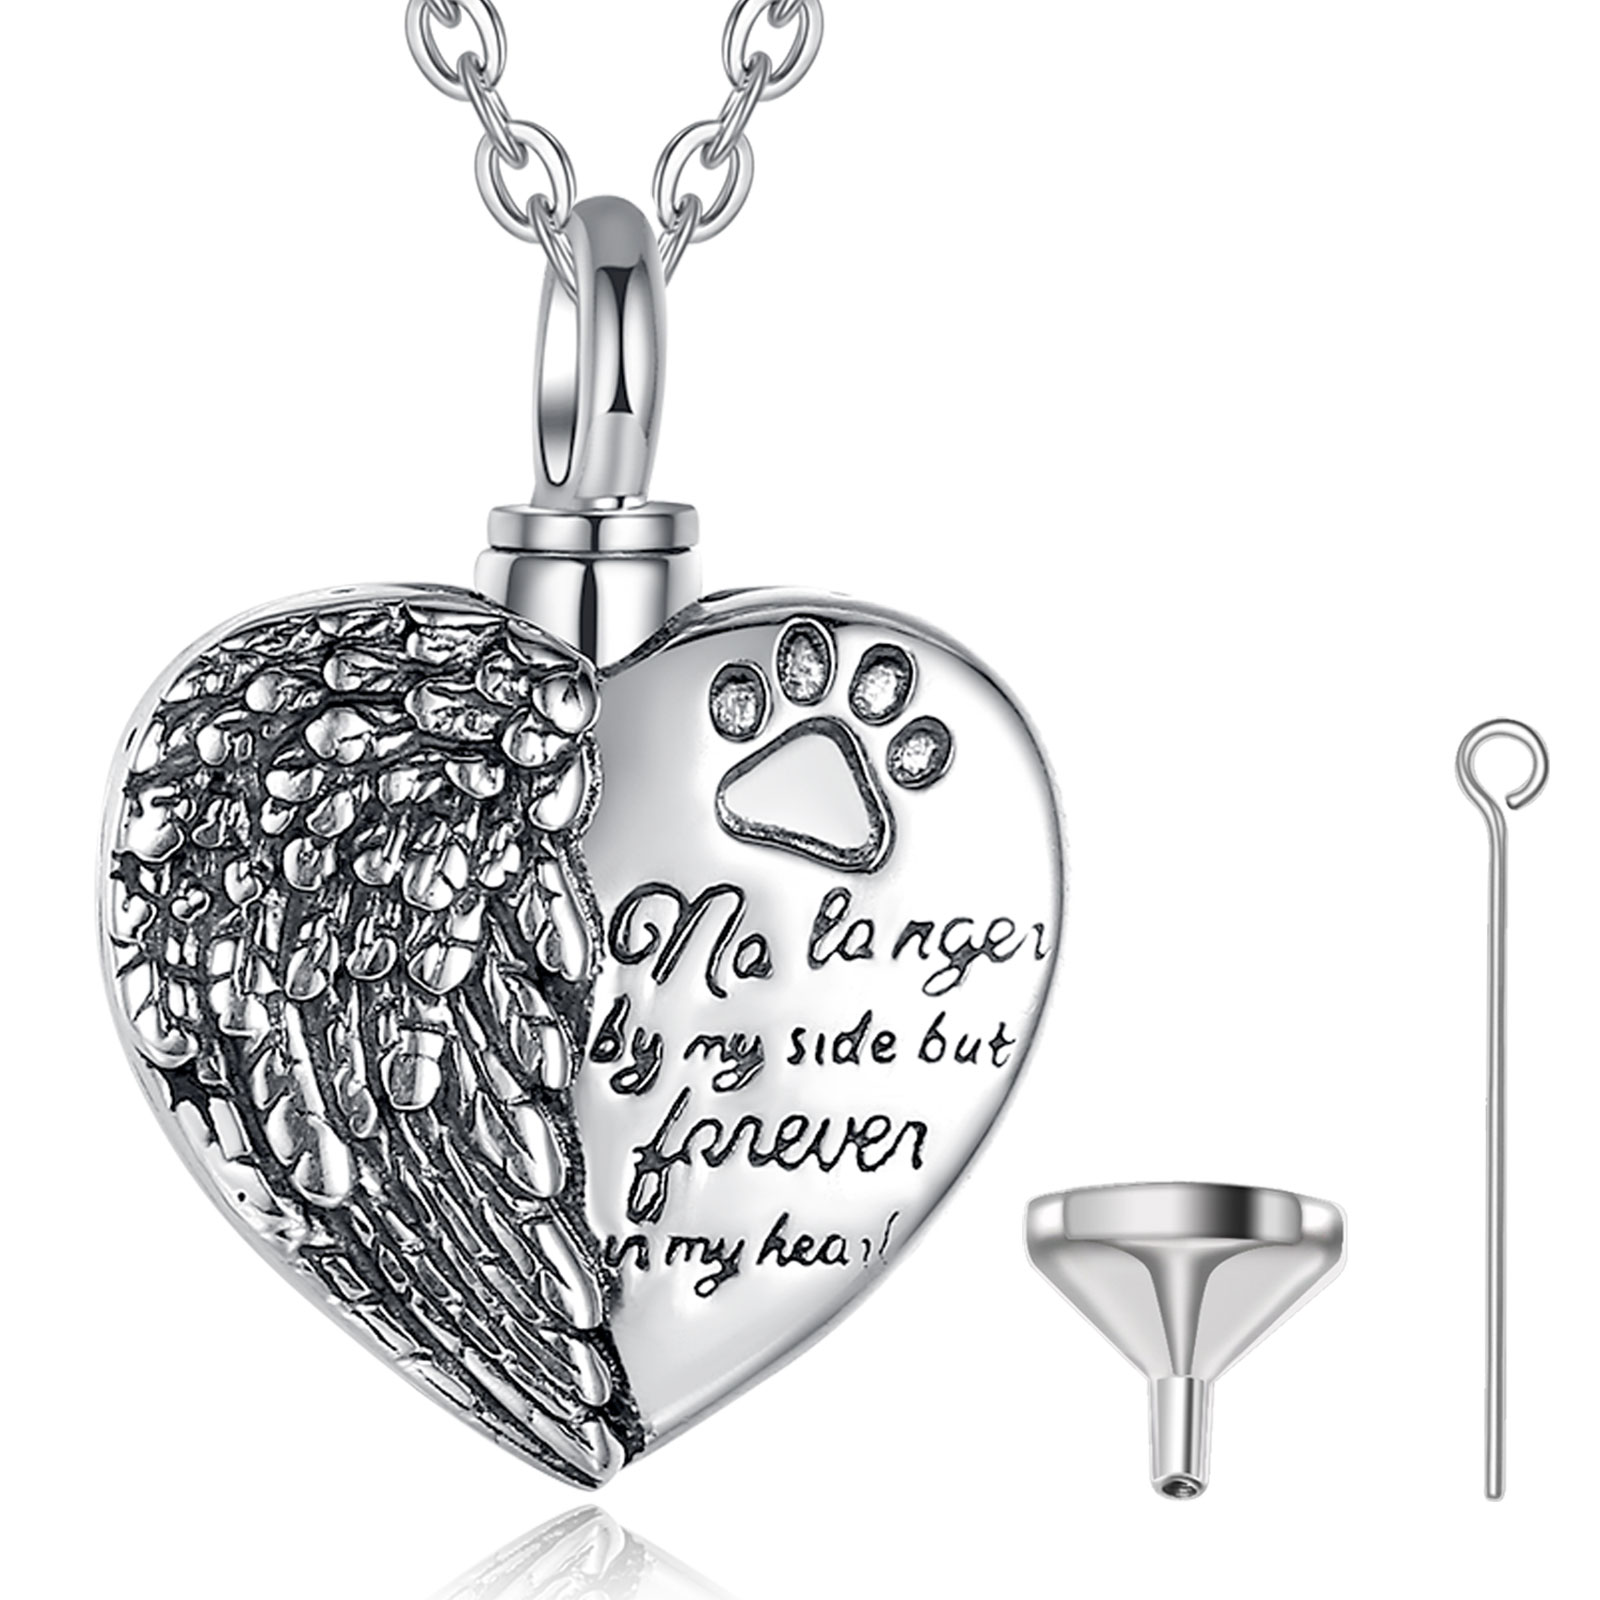 Merryshine Vintage Style 925 Sterling Silver Heart Shaped Cremation Urn Necklace for Ashes